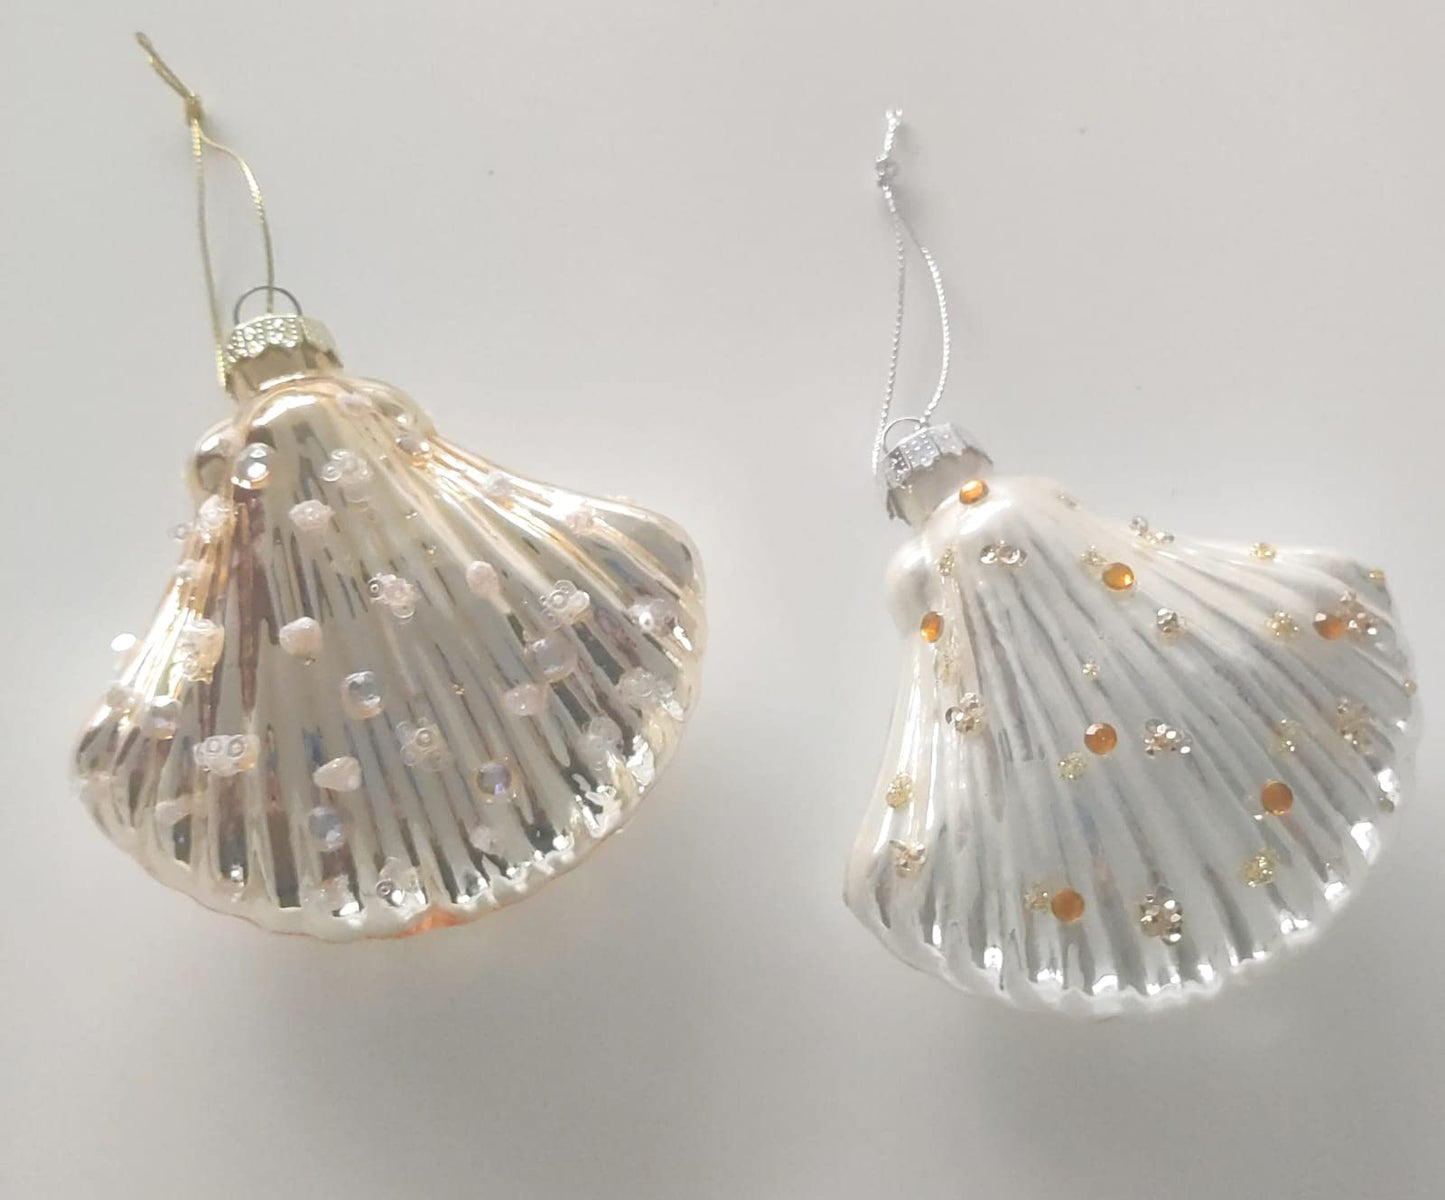 Shells and beads - Christmas decorations - pack of 2 (1 gold color - 1 mother-of-pearl color)